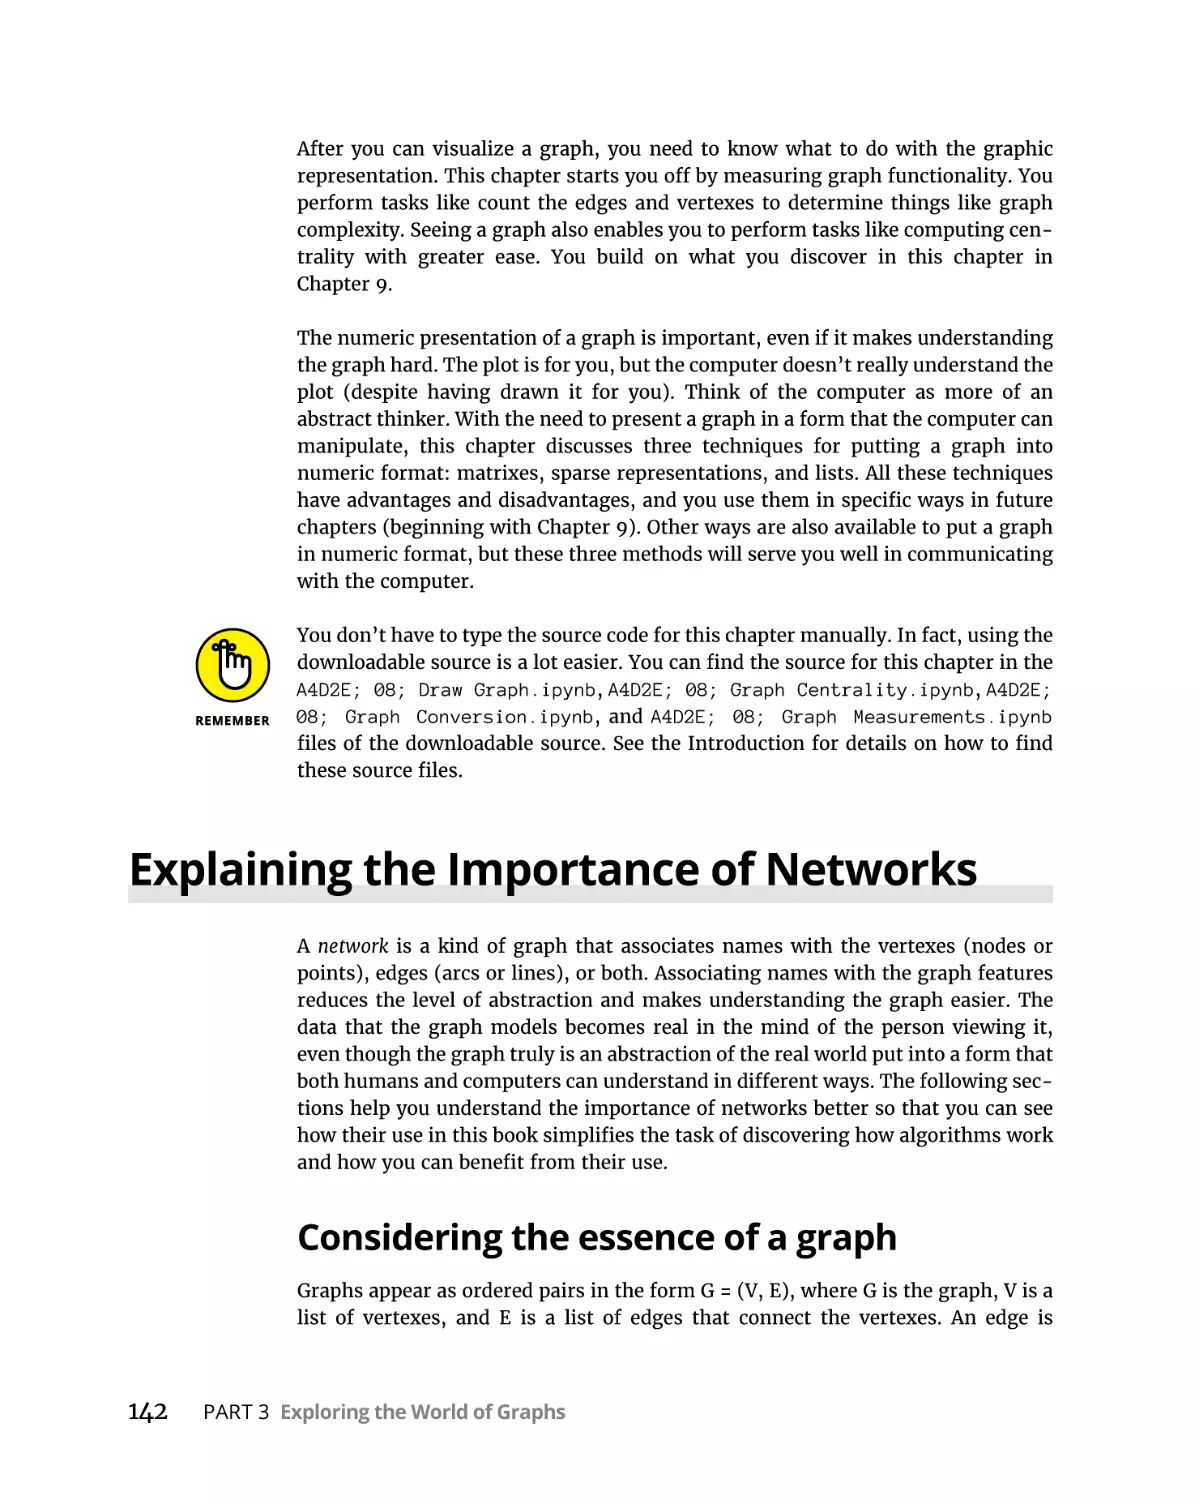 Explaining the Importance of Networks
Considering the essence of a graph